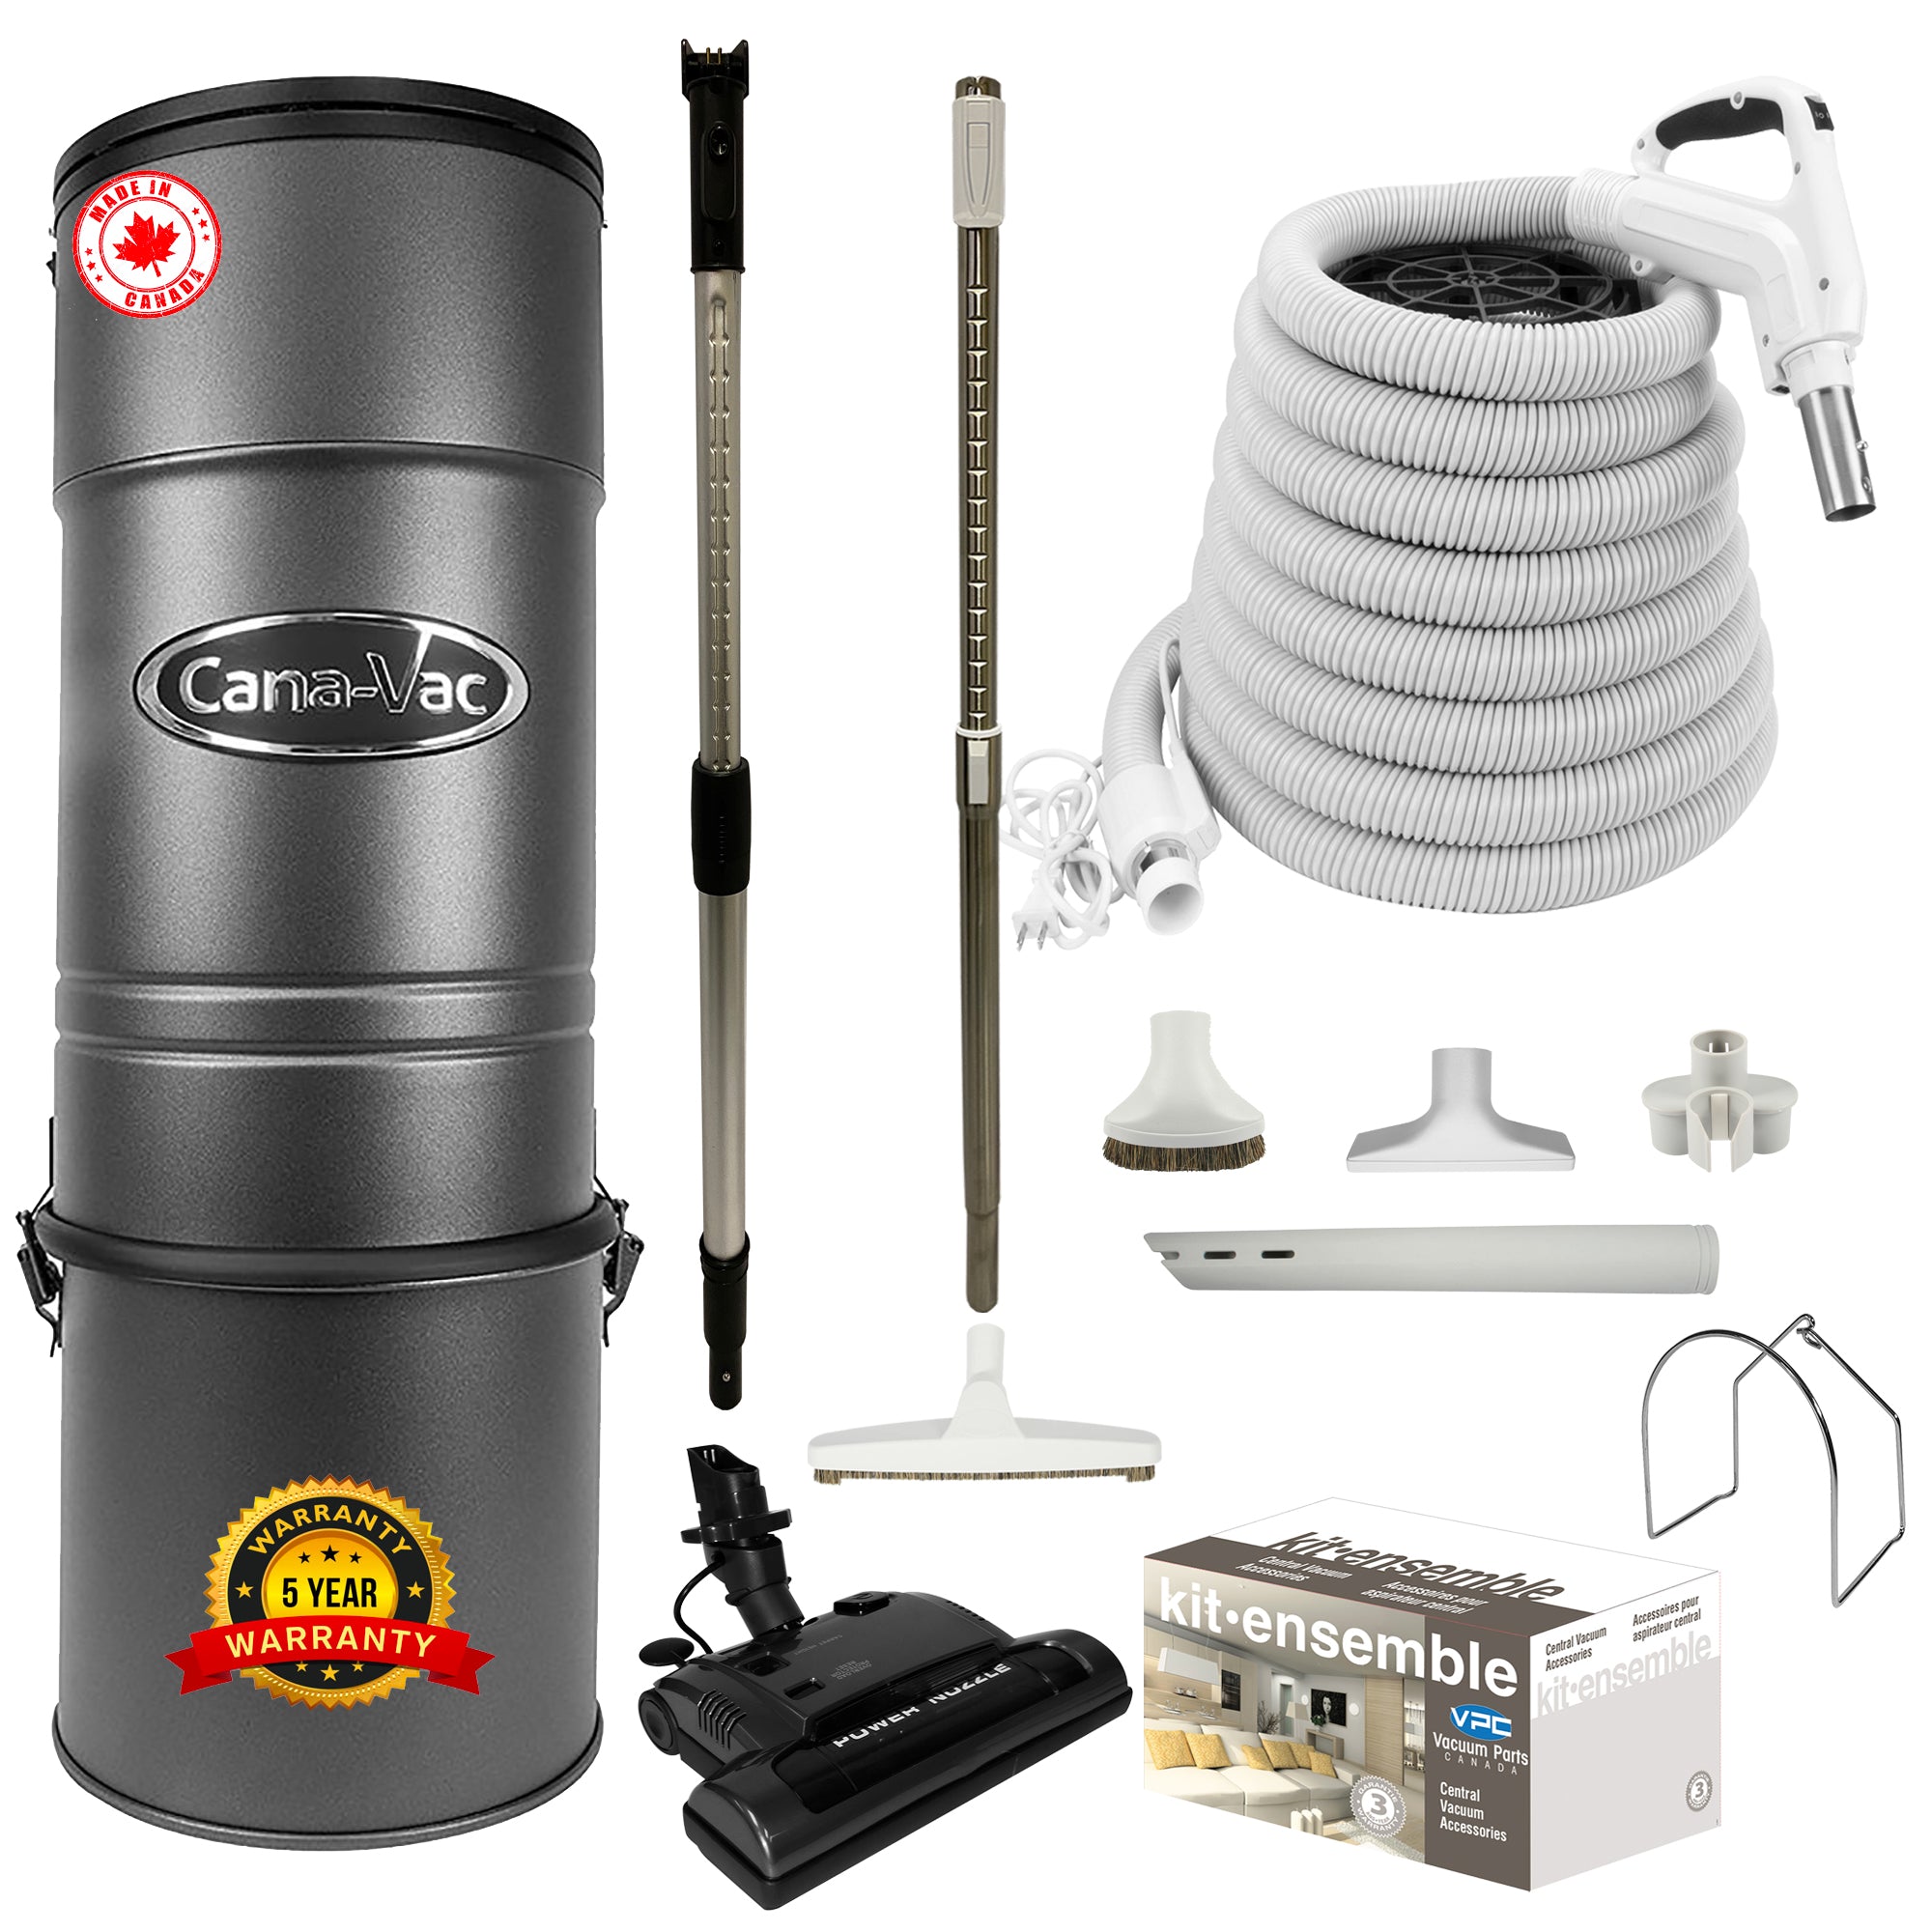 CanaVac CV587 Central Vacuum with Standard Electric Package